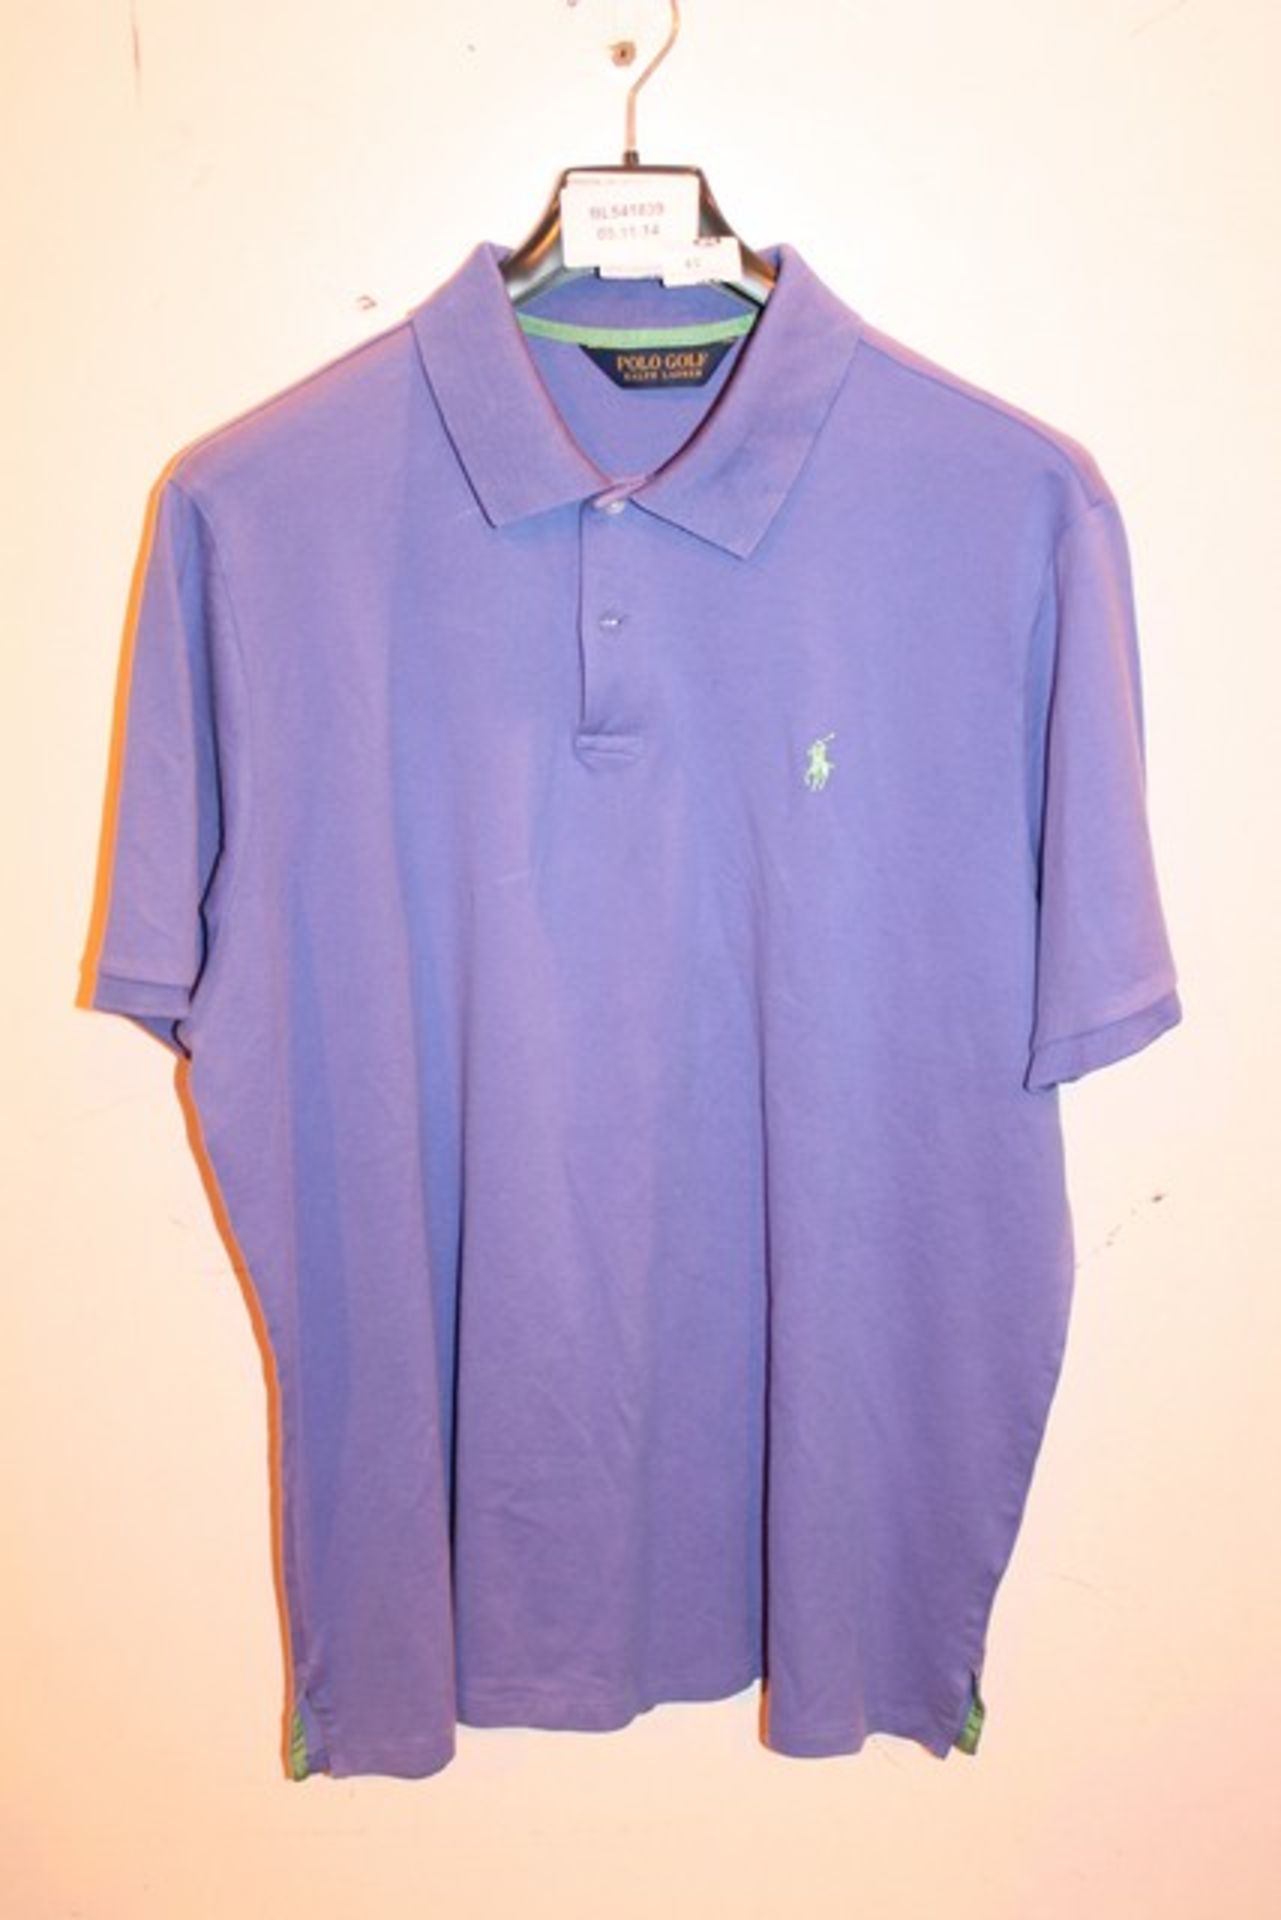 1 x SIZE XXL POLO RALPH LAUREN POLO TSHIRT (541839)  *PLEASE NOTE THAT THE BID PRICE IS MULTIPLIED